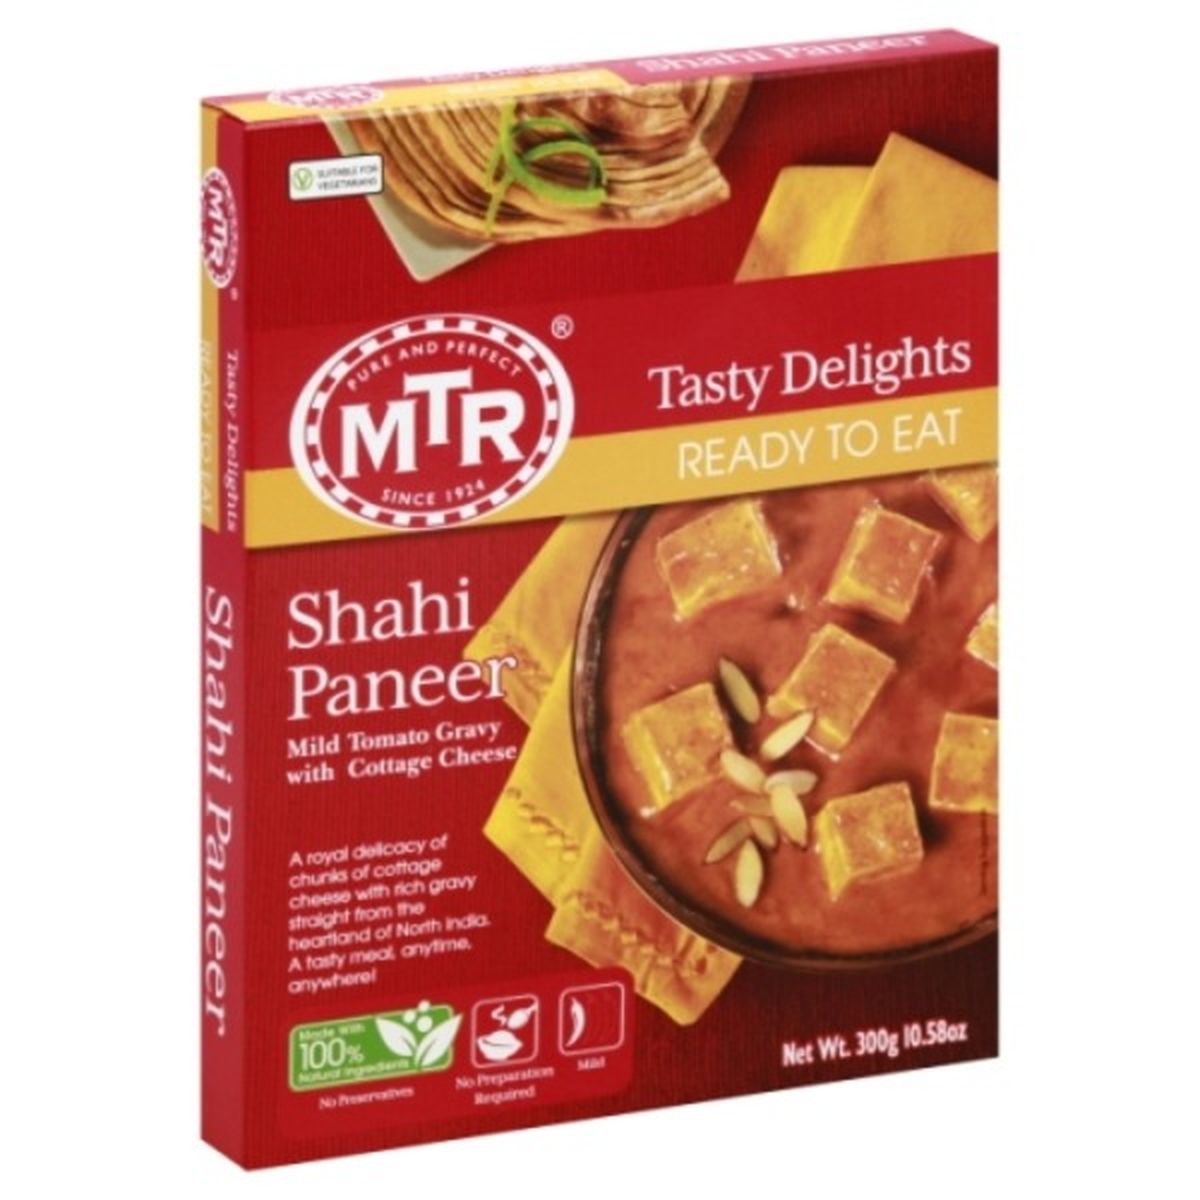 Calories in MTR Tasty Delights Shahi Paneer, Ready to Eat